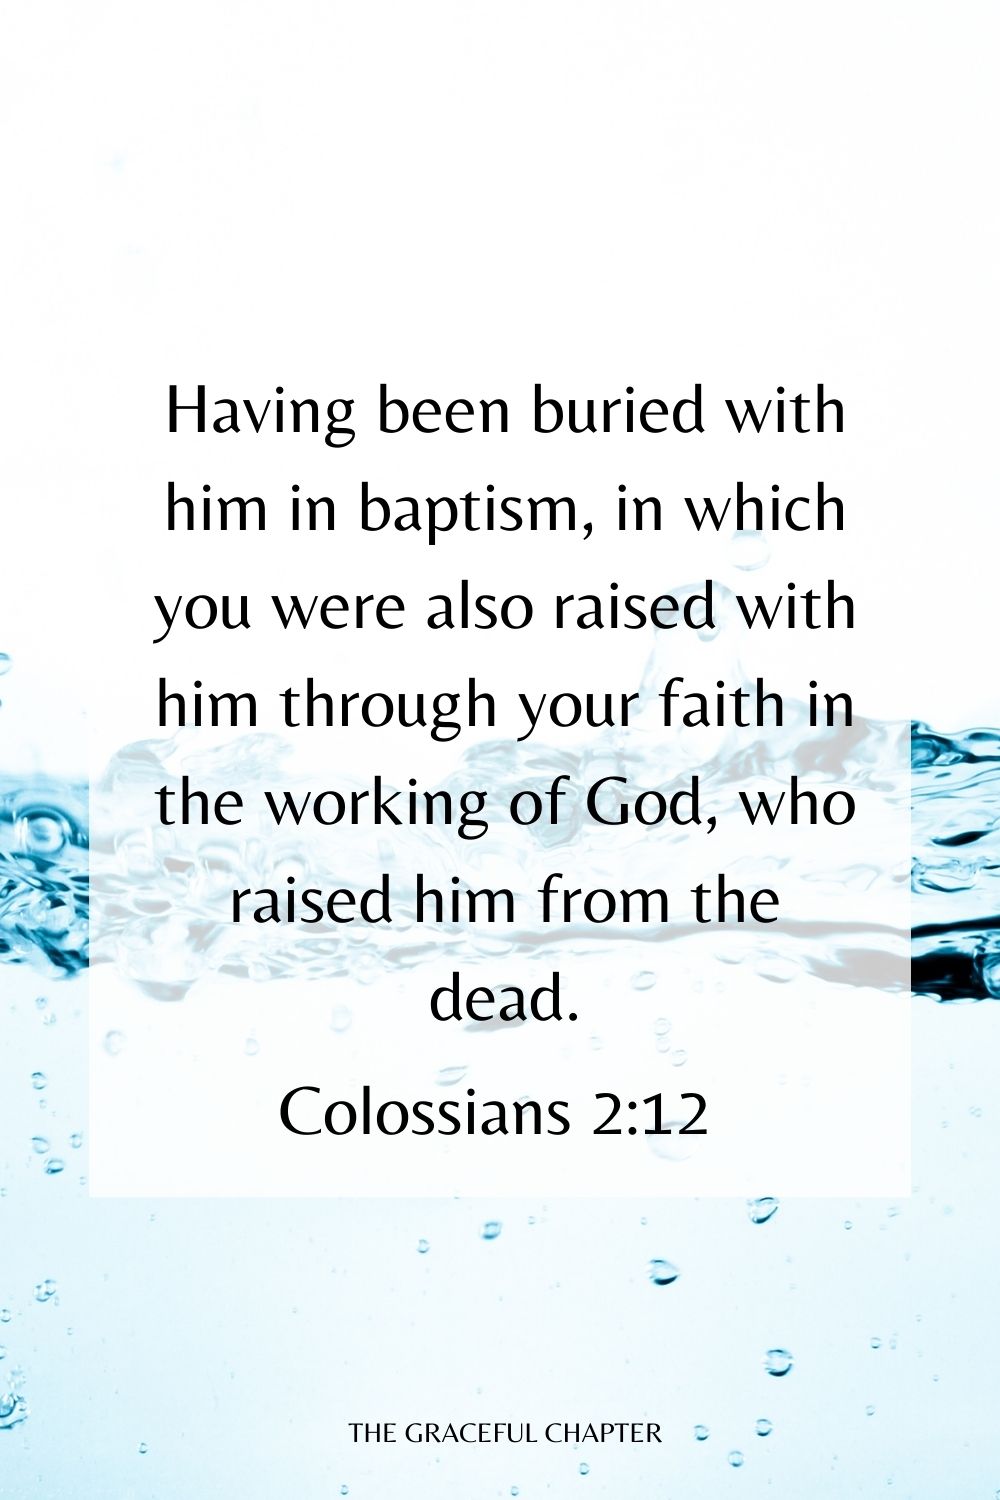 Having been buried with him in baptism, in which you were also raised with him through your faith in the working of God, who raised him from the dead. Colossians 2:12
bible verses about baptism